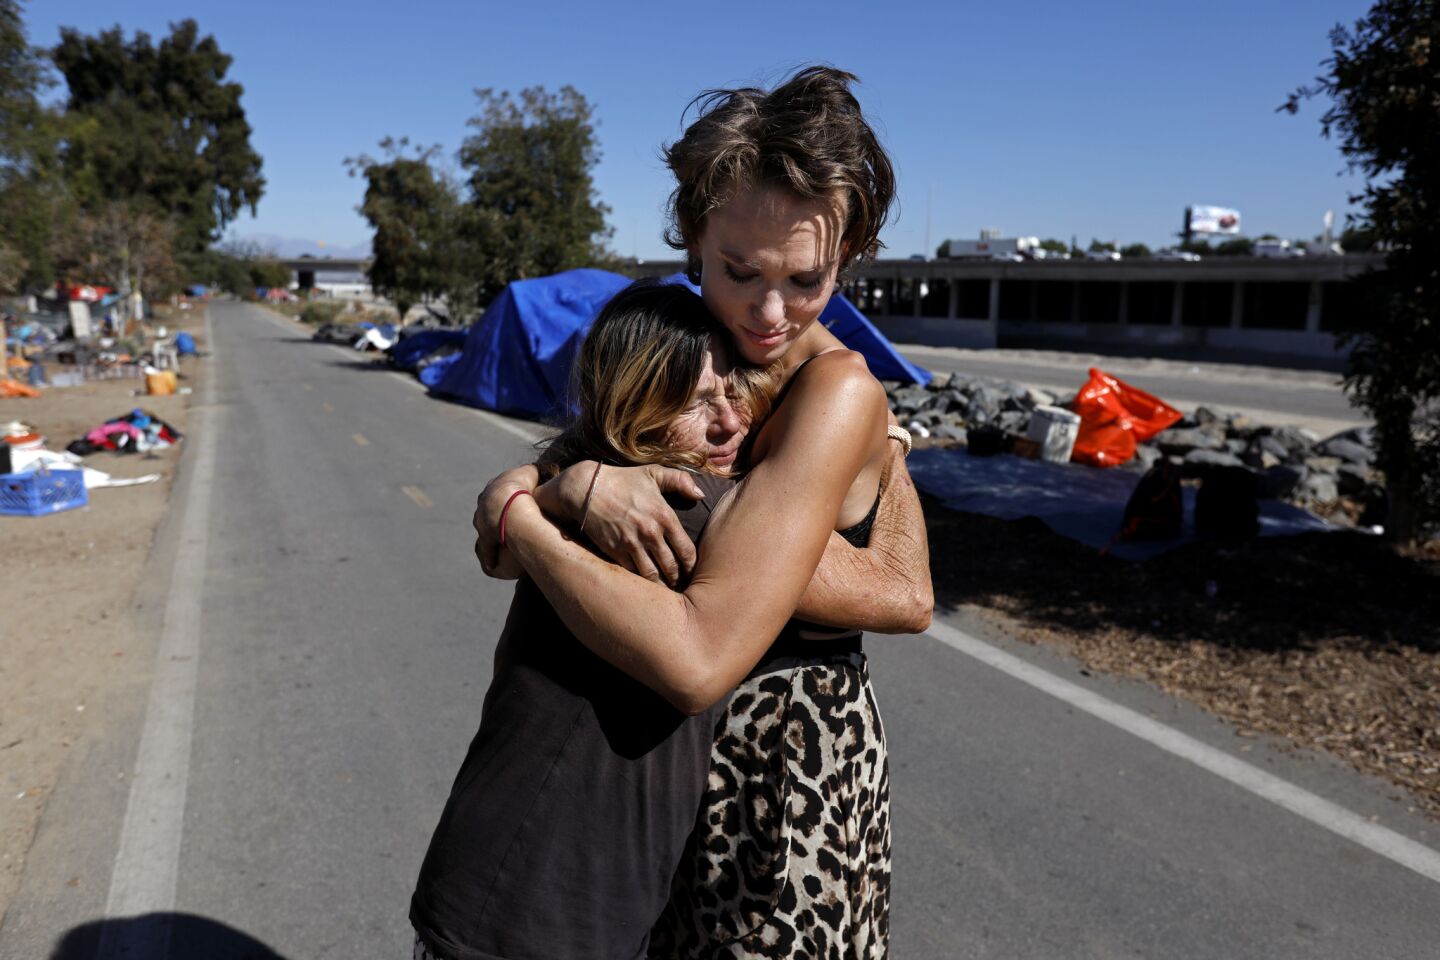 Kathy Schuler, 62, left, who was released from jail Tuesday evening, is given a hug by her granddaughter Ashley Foster, 23, where they live at a homeless encampment along the Santa Ana River in Anaheim.